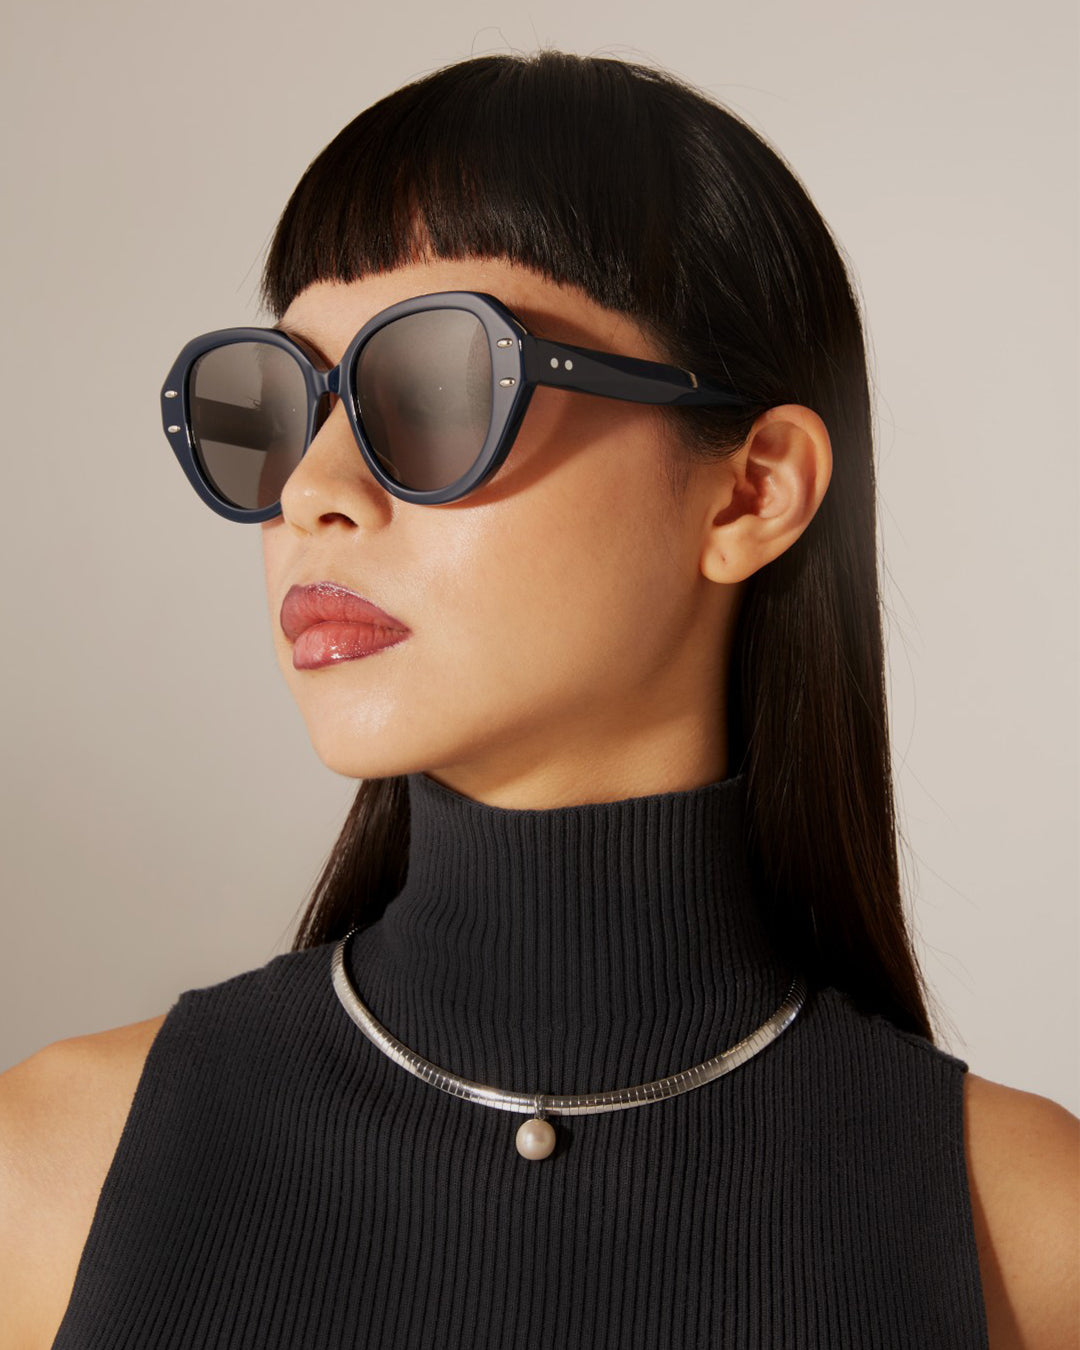 A person with long dark hair and straight bangs wears stylish Mirage sunglasses by For Art&#39;s Sake®, a black sleeveless turtleneck top, and a gold and silver-tone metal necklace with a single pearl pendant. The background is plain and light-colored.